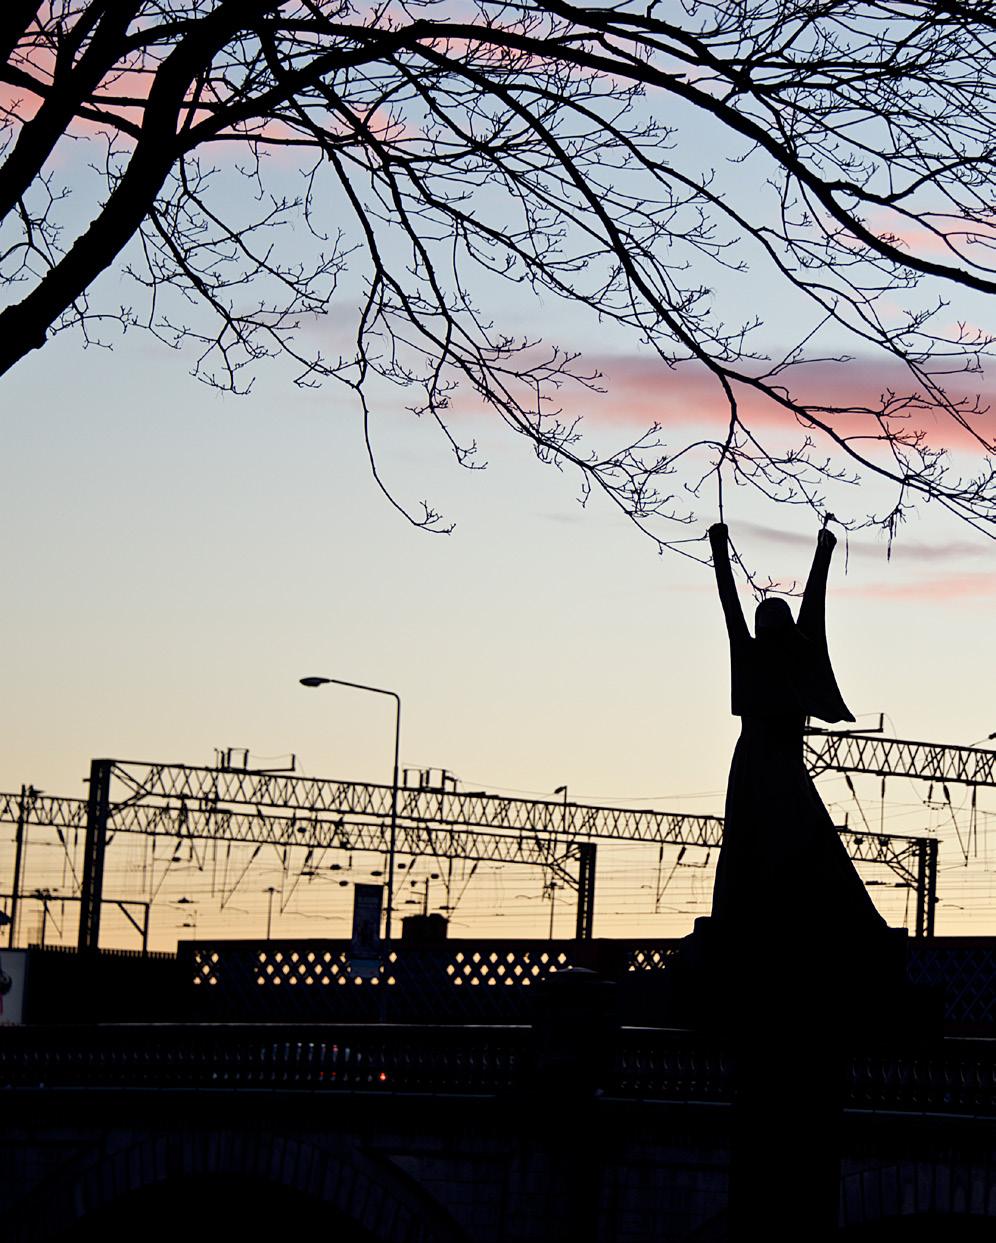 Cover image: Sunset creating silhouette of the statue La Pasionaria in Glasgow.